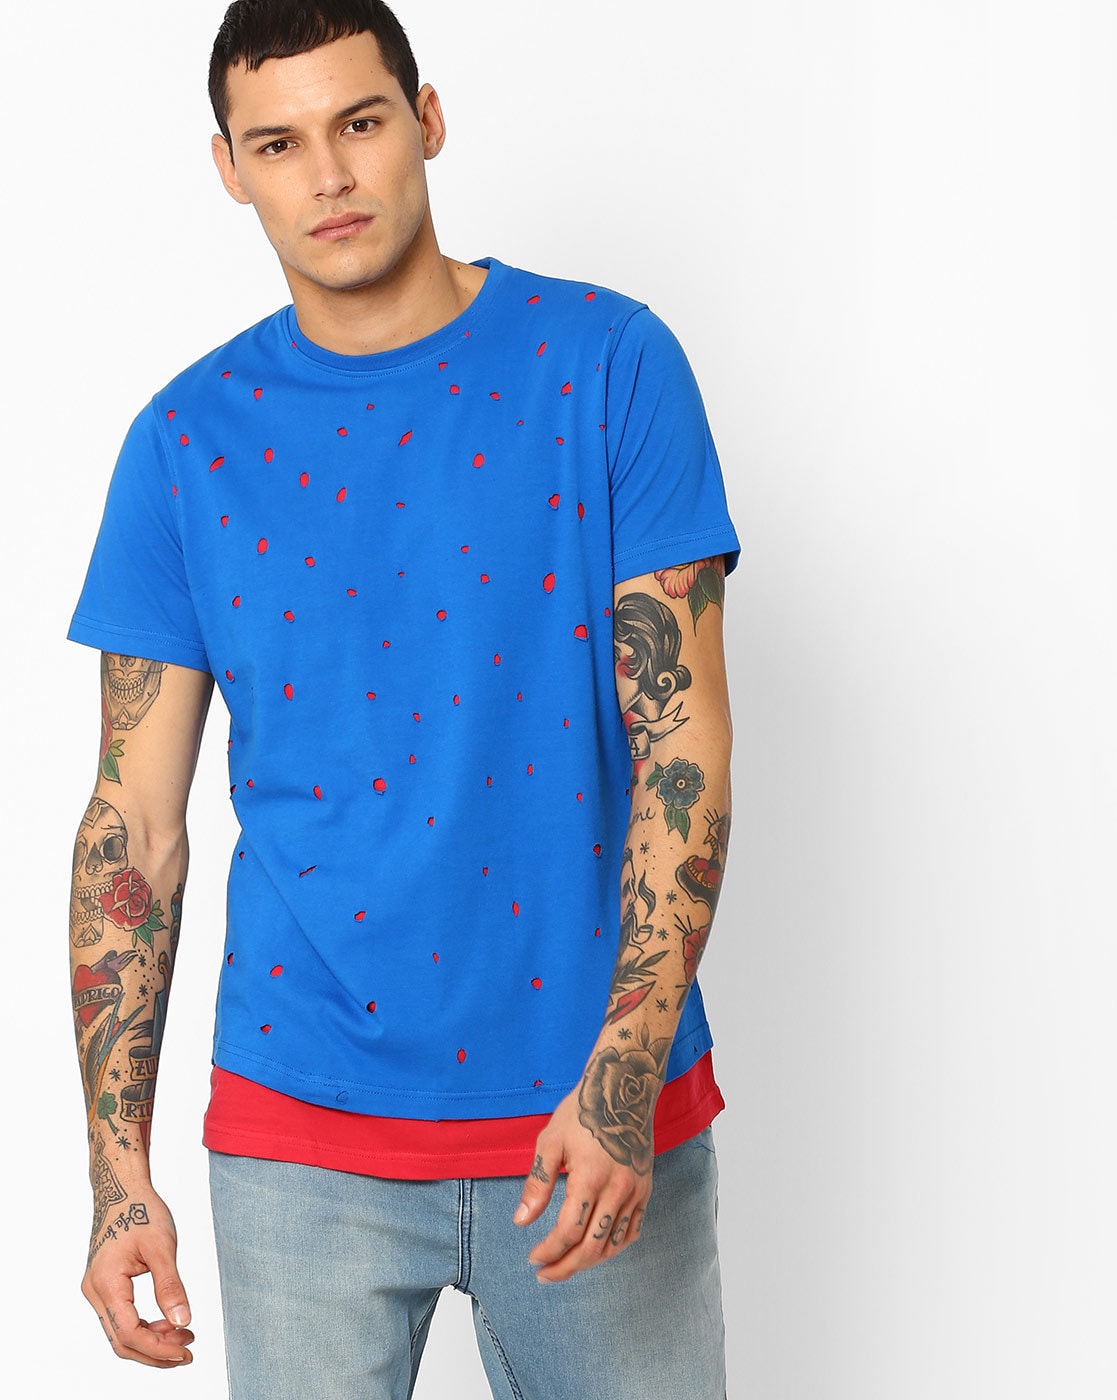 double layer t shirt online india